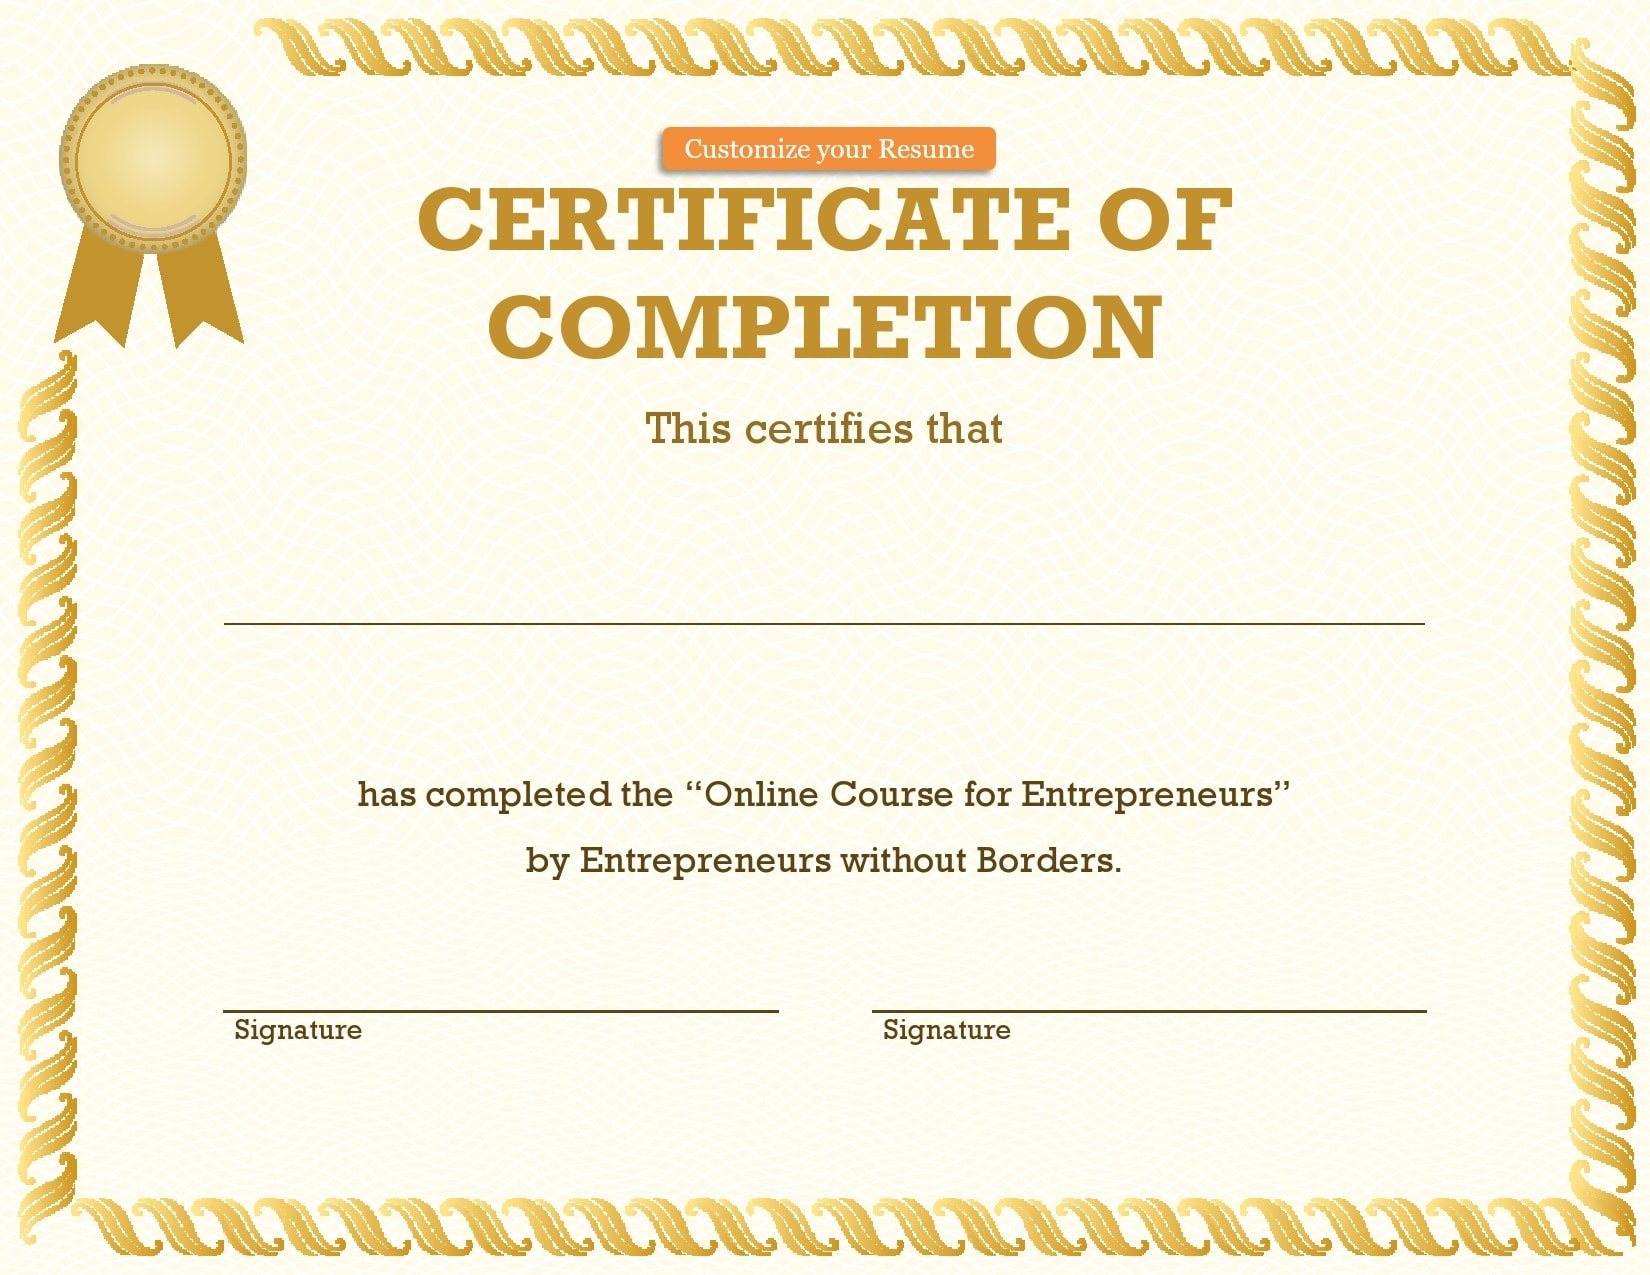 10 Great Certificate of Completion Templates (10% FREE) For Free Certificate Templates For Word 2007